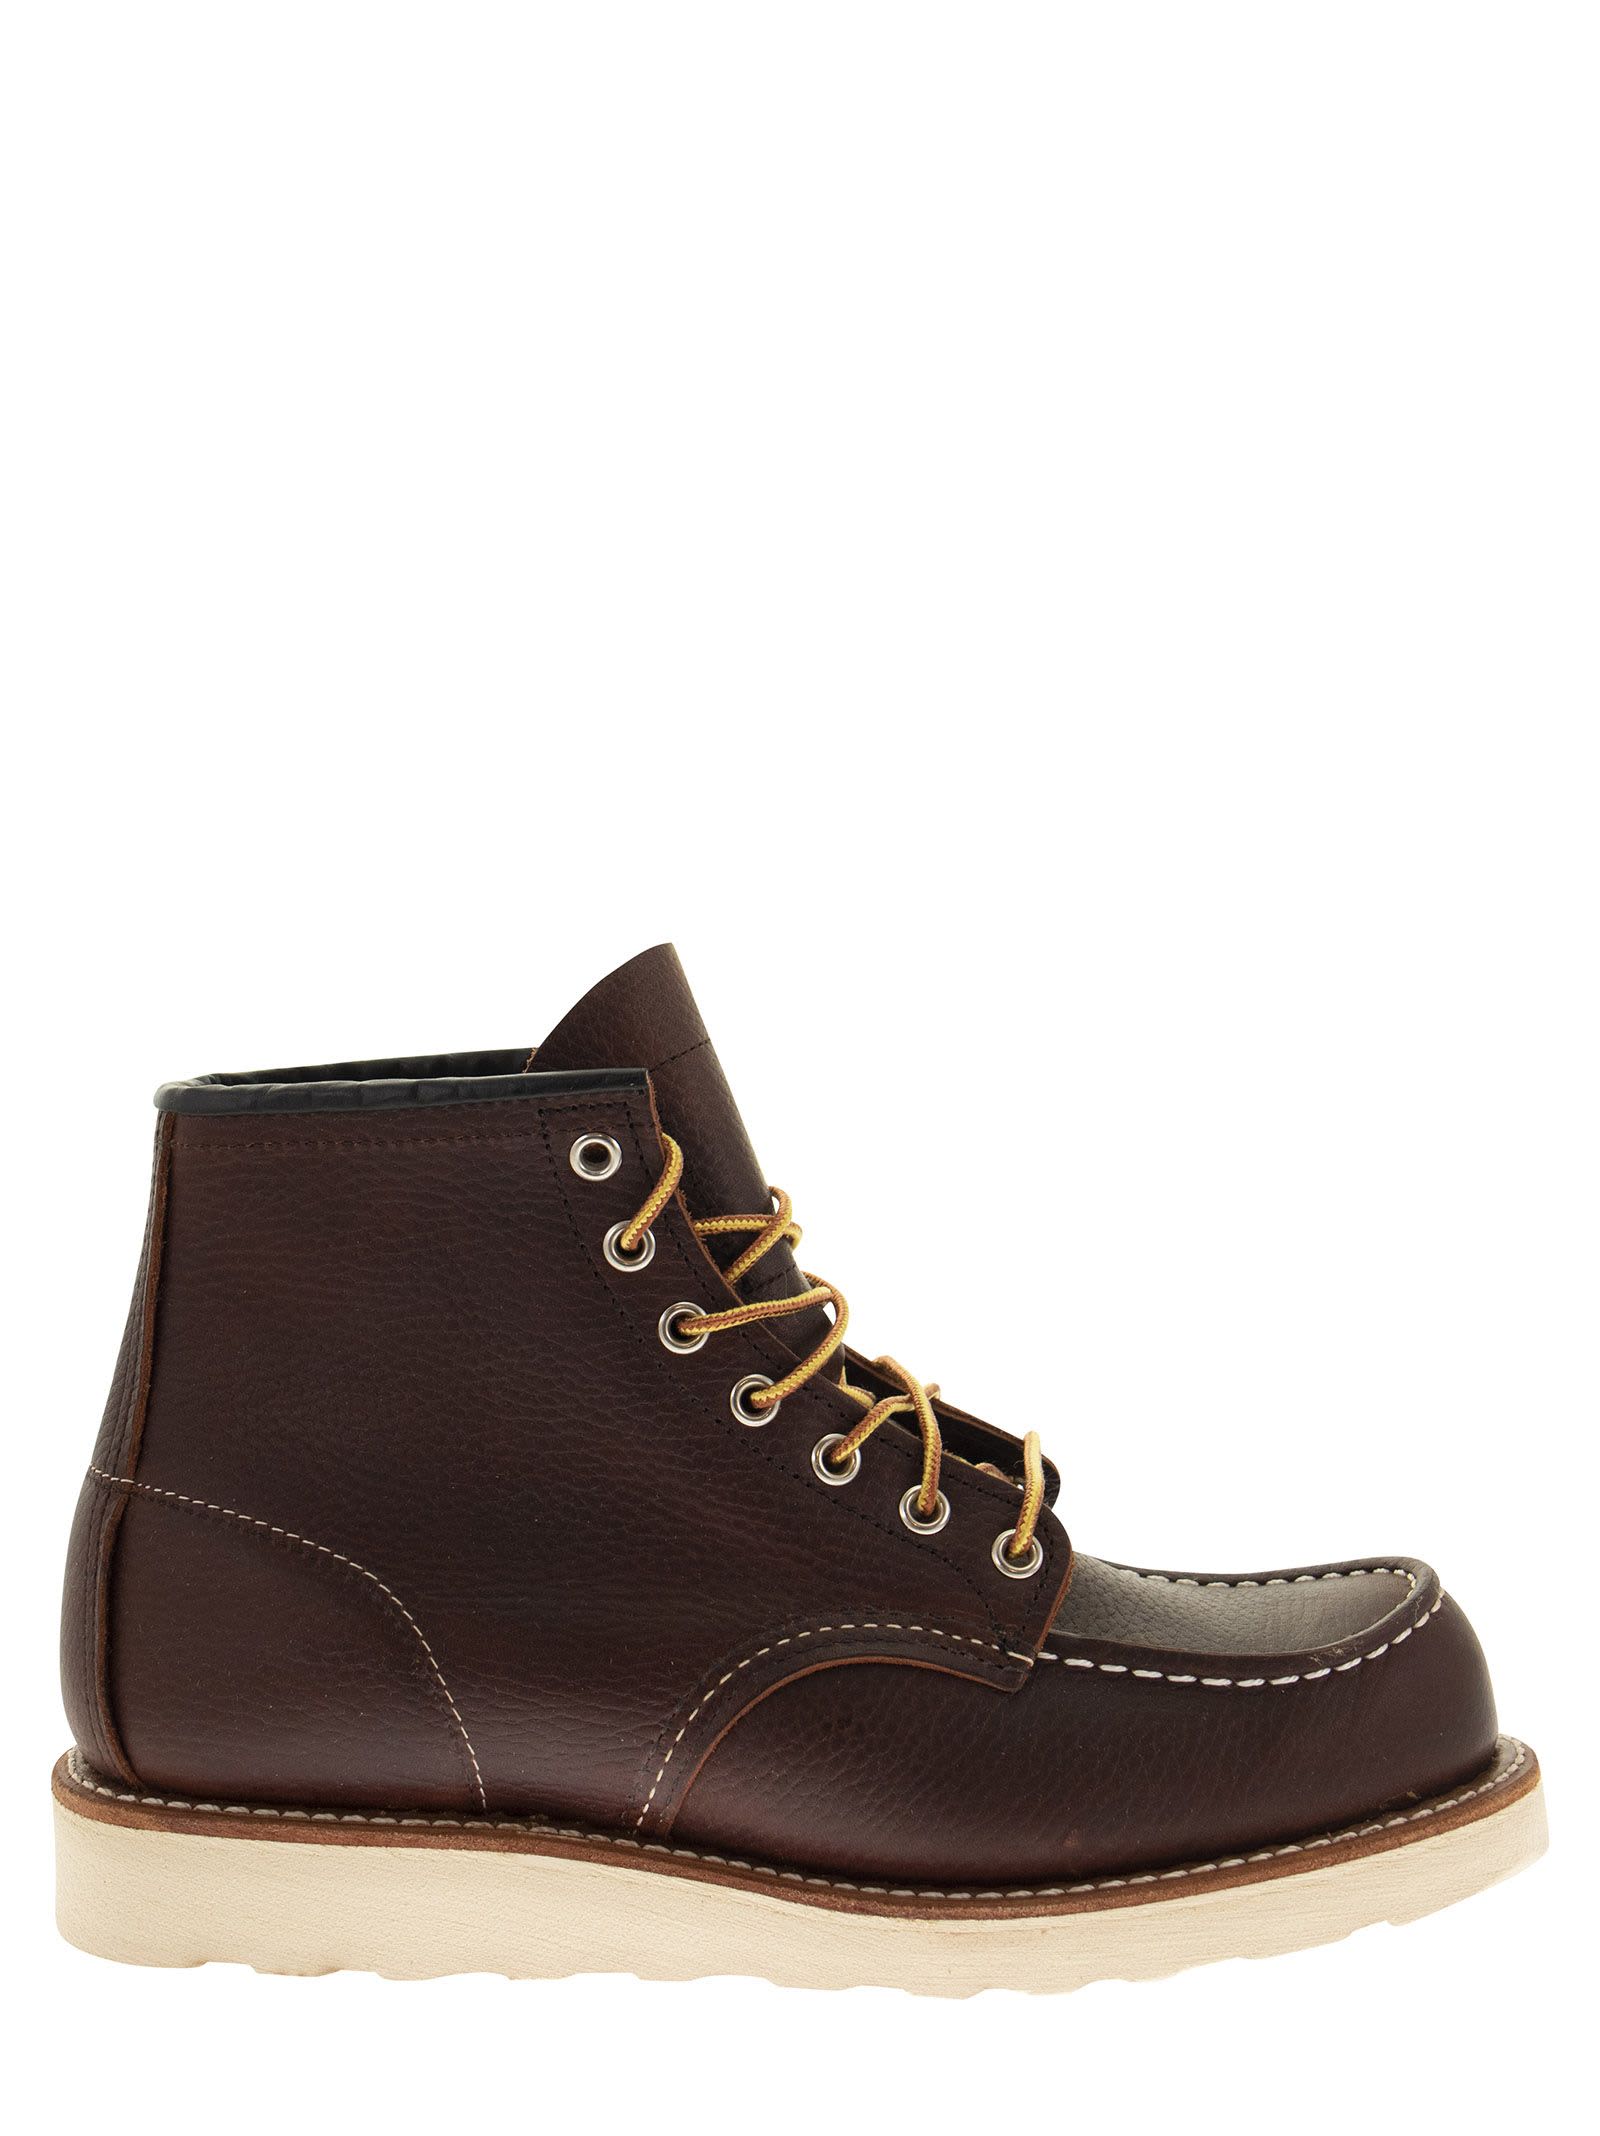 Classic Moc 8138 - Lace-up Boot